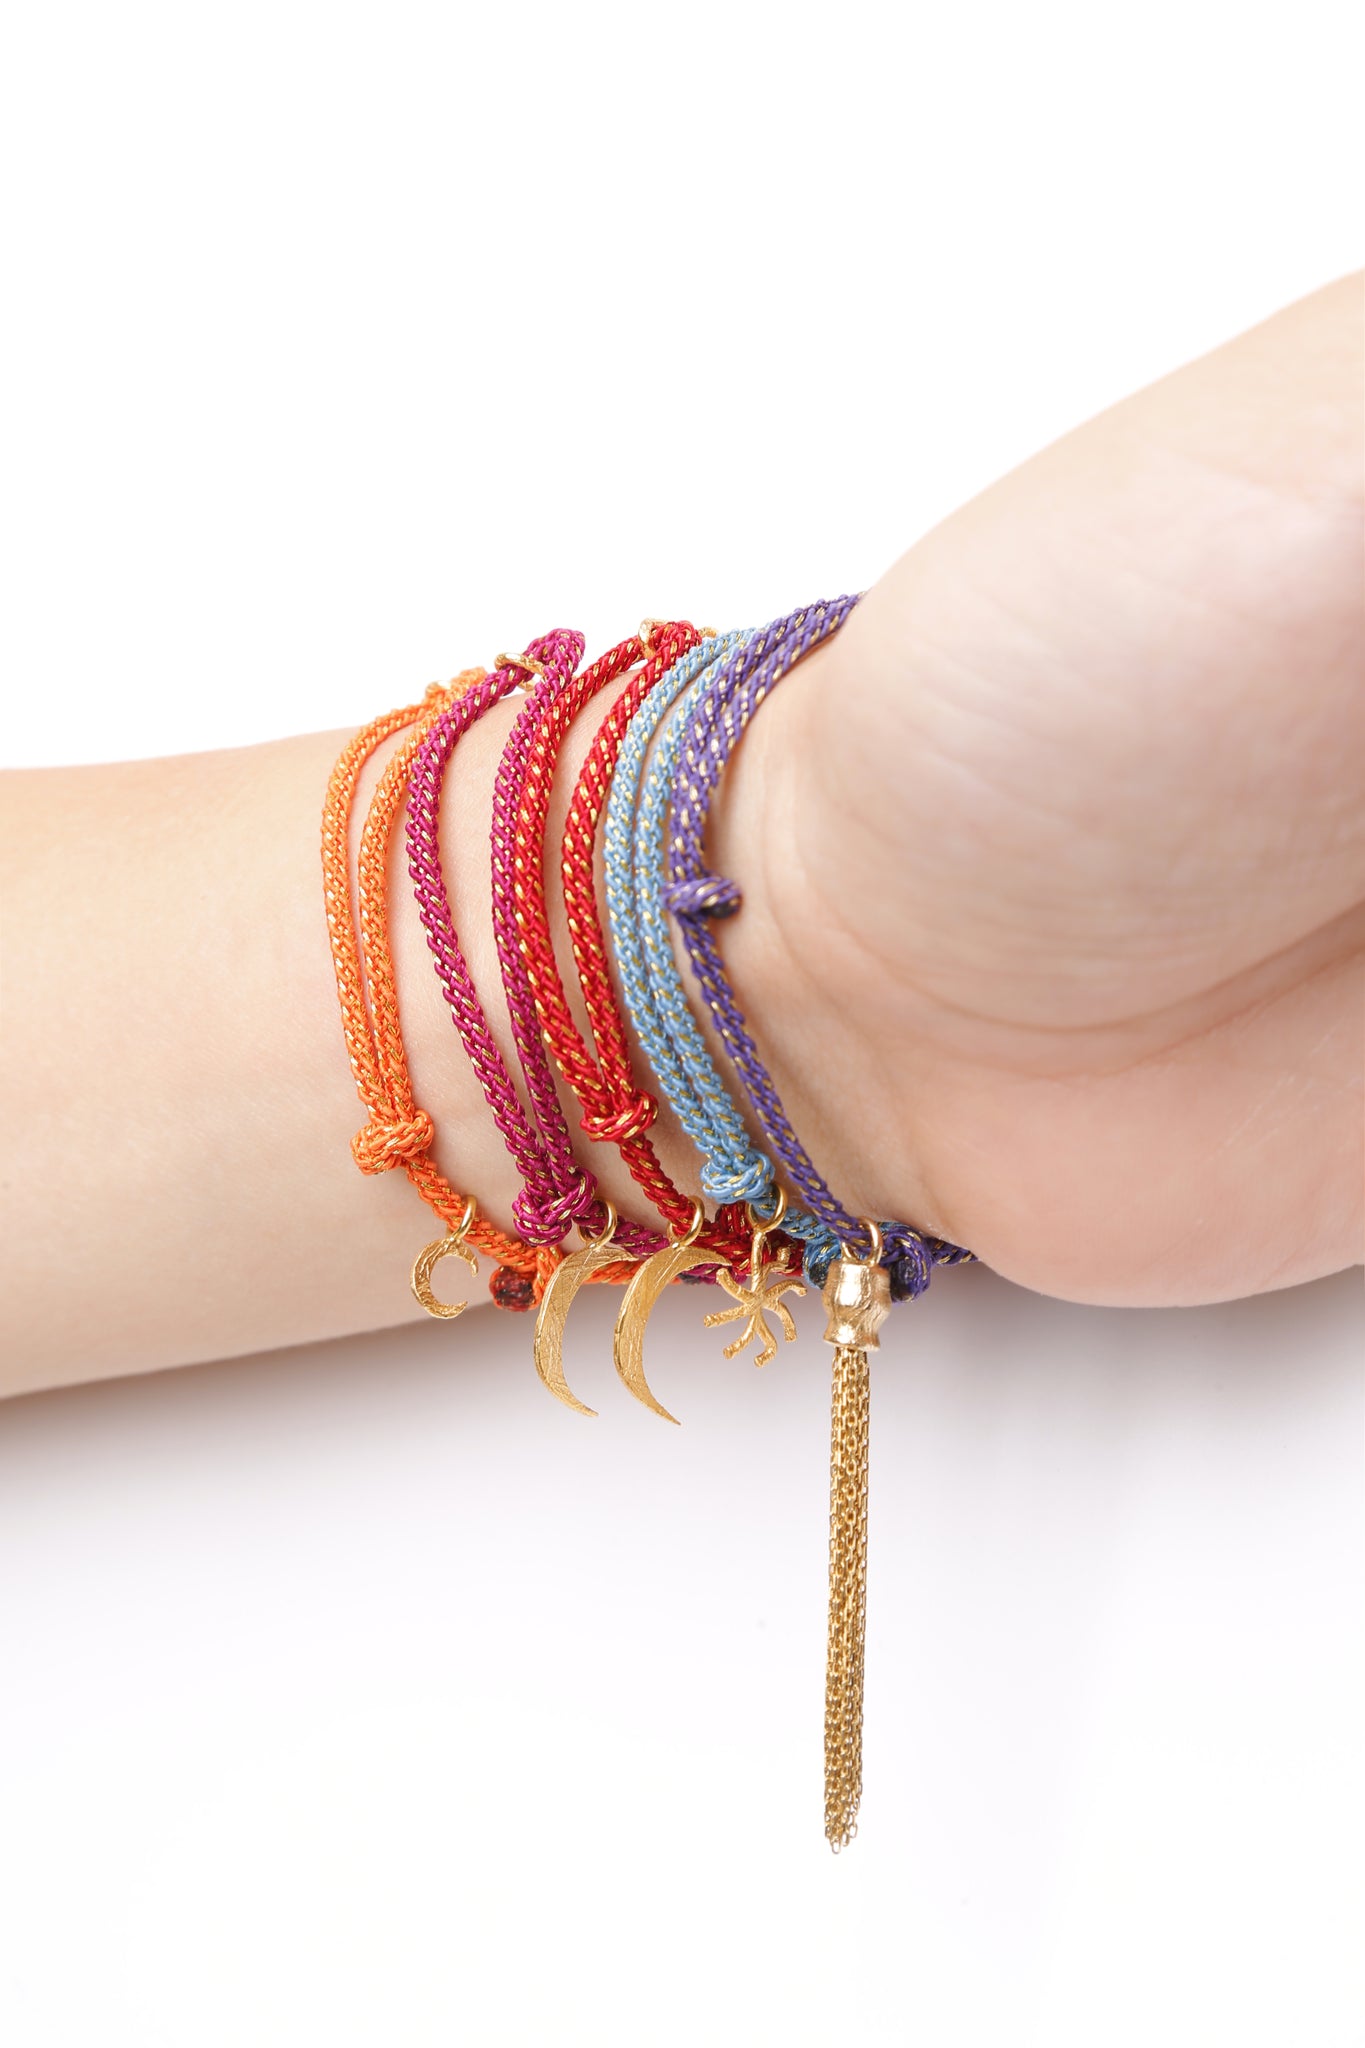 Tuft and Paperclip bracelet